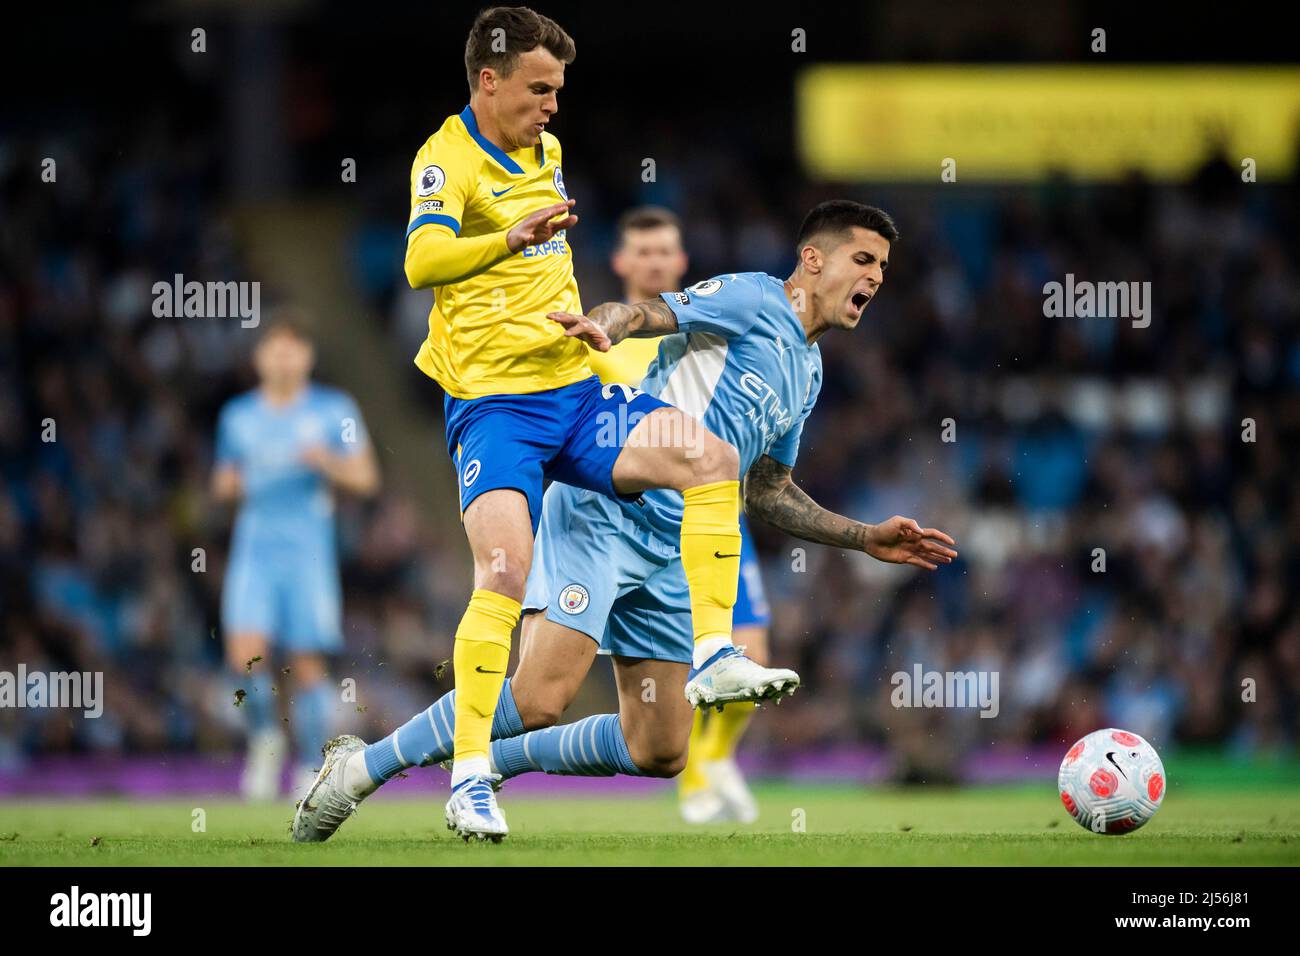 Manchester, UK, 20 April 2022,  Manchester City's Joao Cancelo is tackled by Brighton and Hove Albion's Solly March. Picture date: Thursday April 21, 2022. Photo credit should read:   Anthony Devlin/Alamy Live News/Alamy Live News Stock Photo